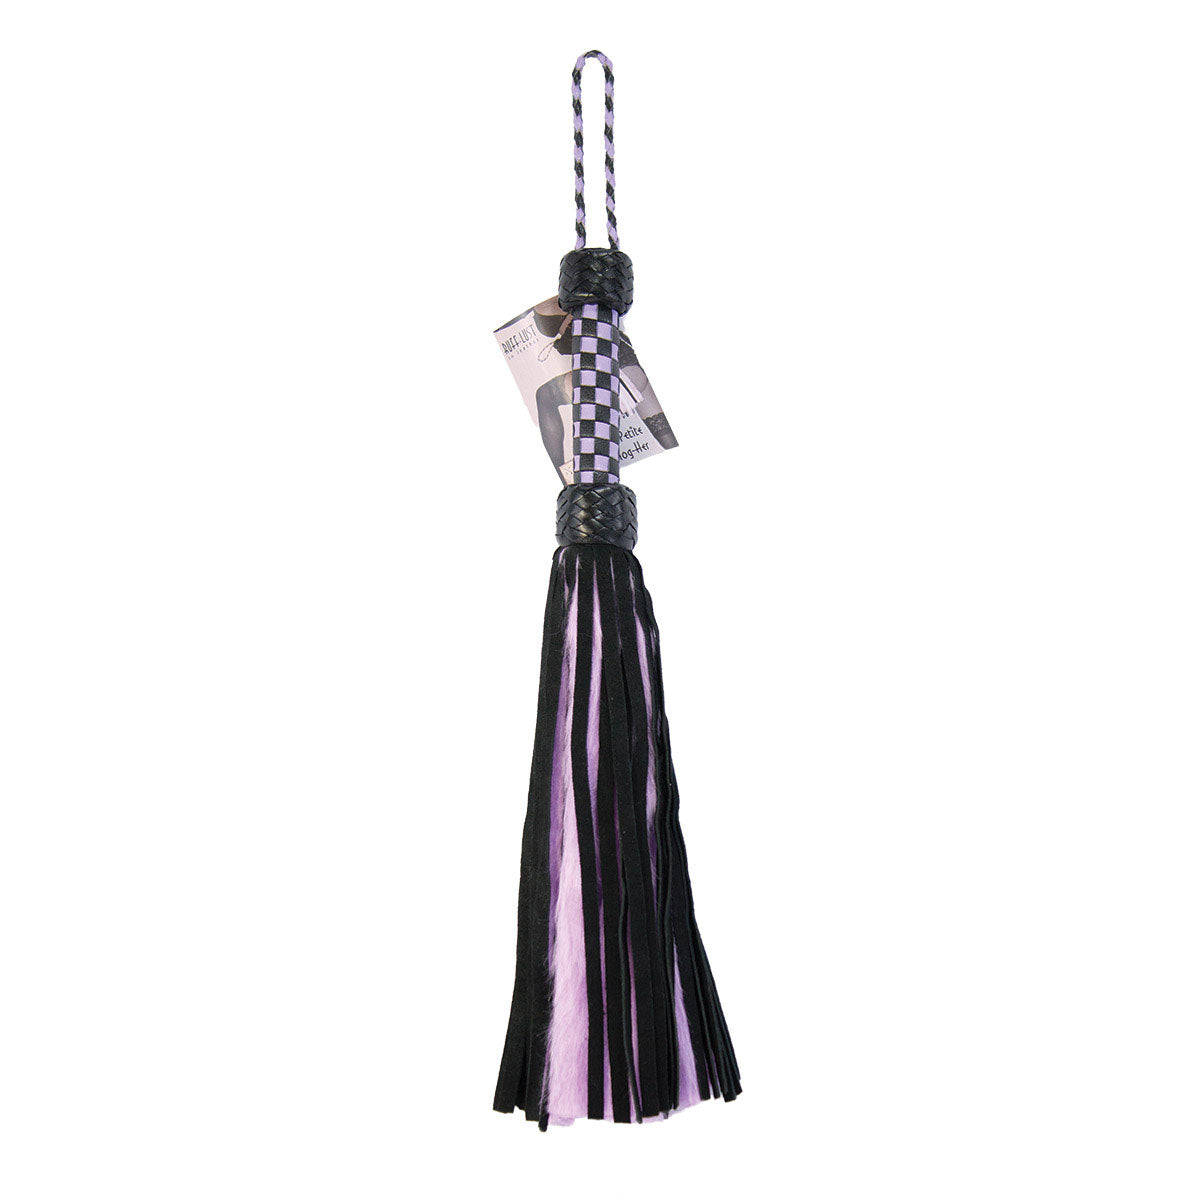 Suede and Fluff Mini Flogger - 18"